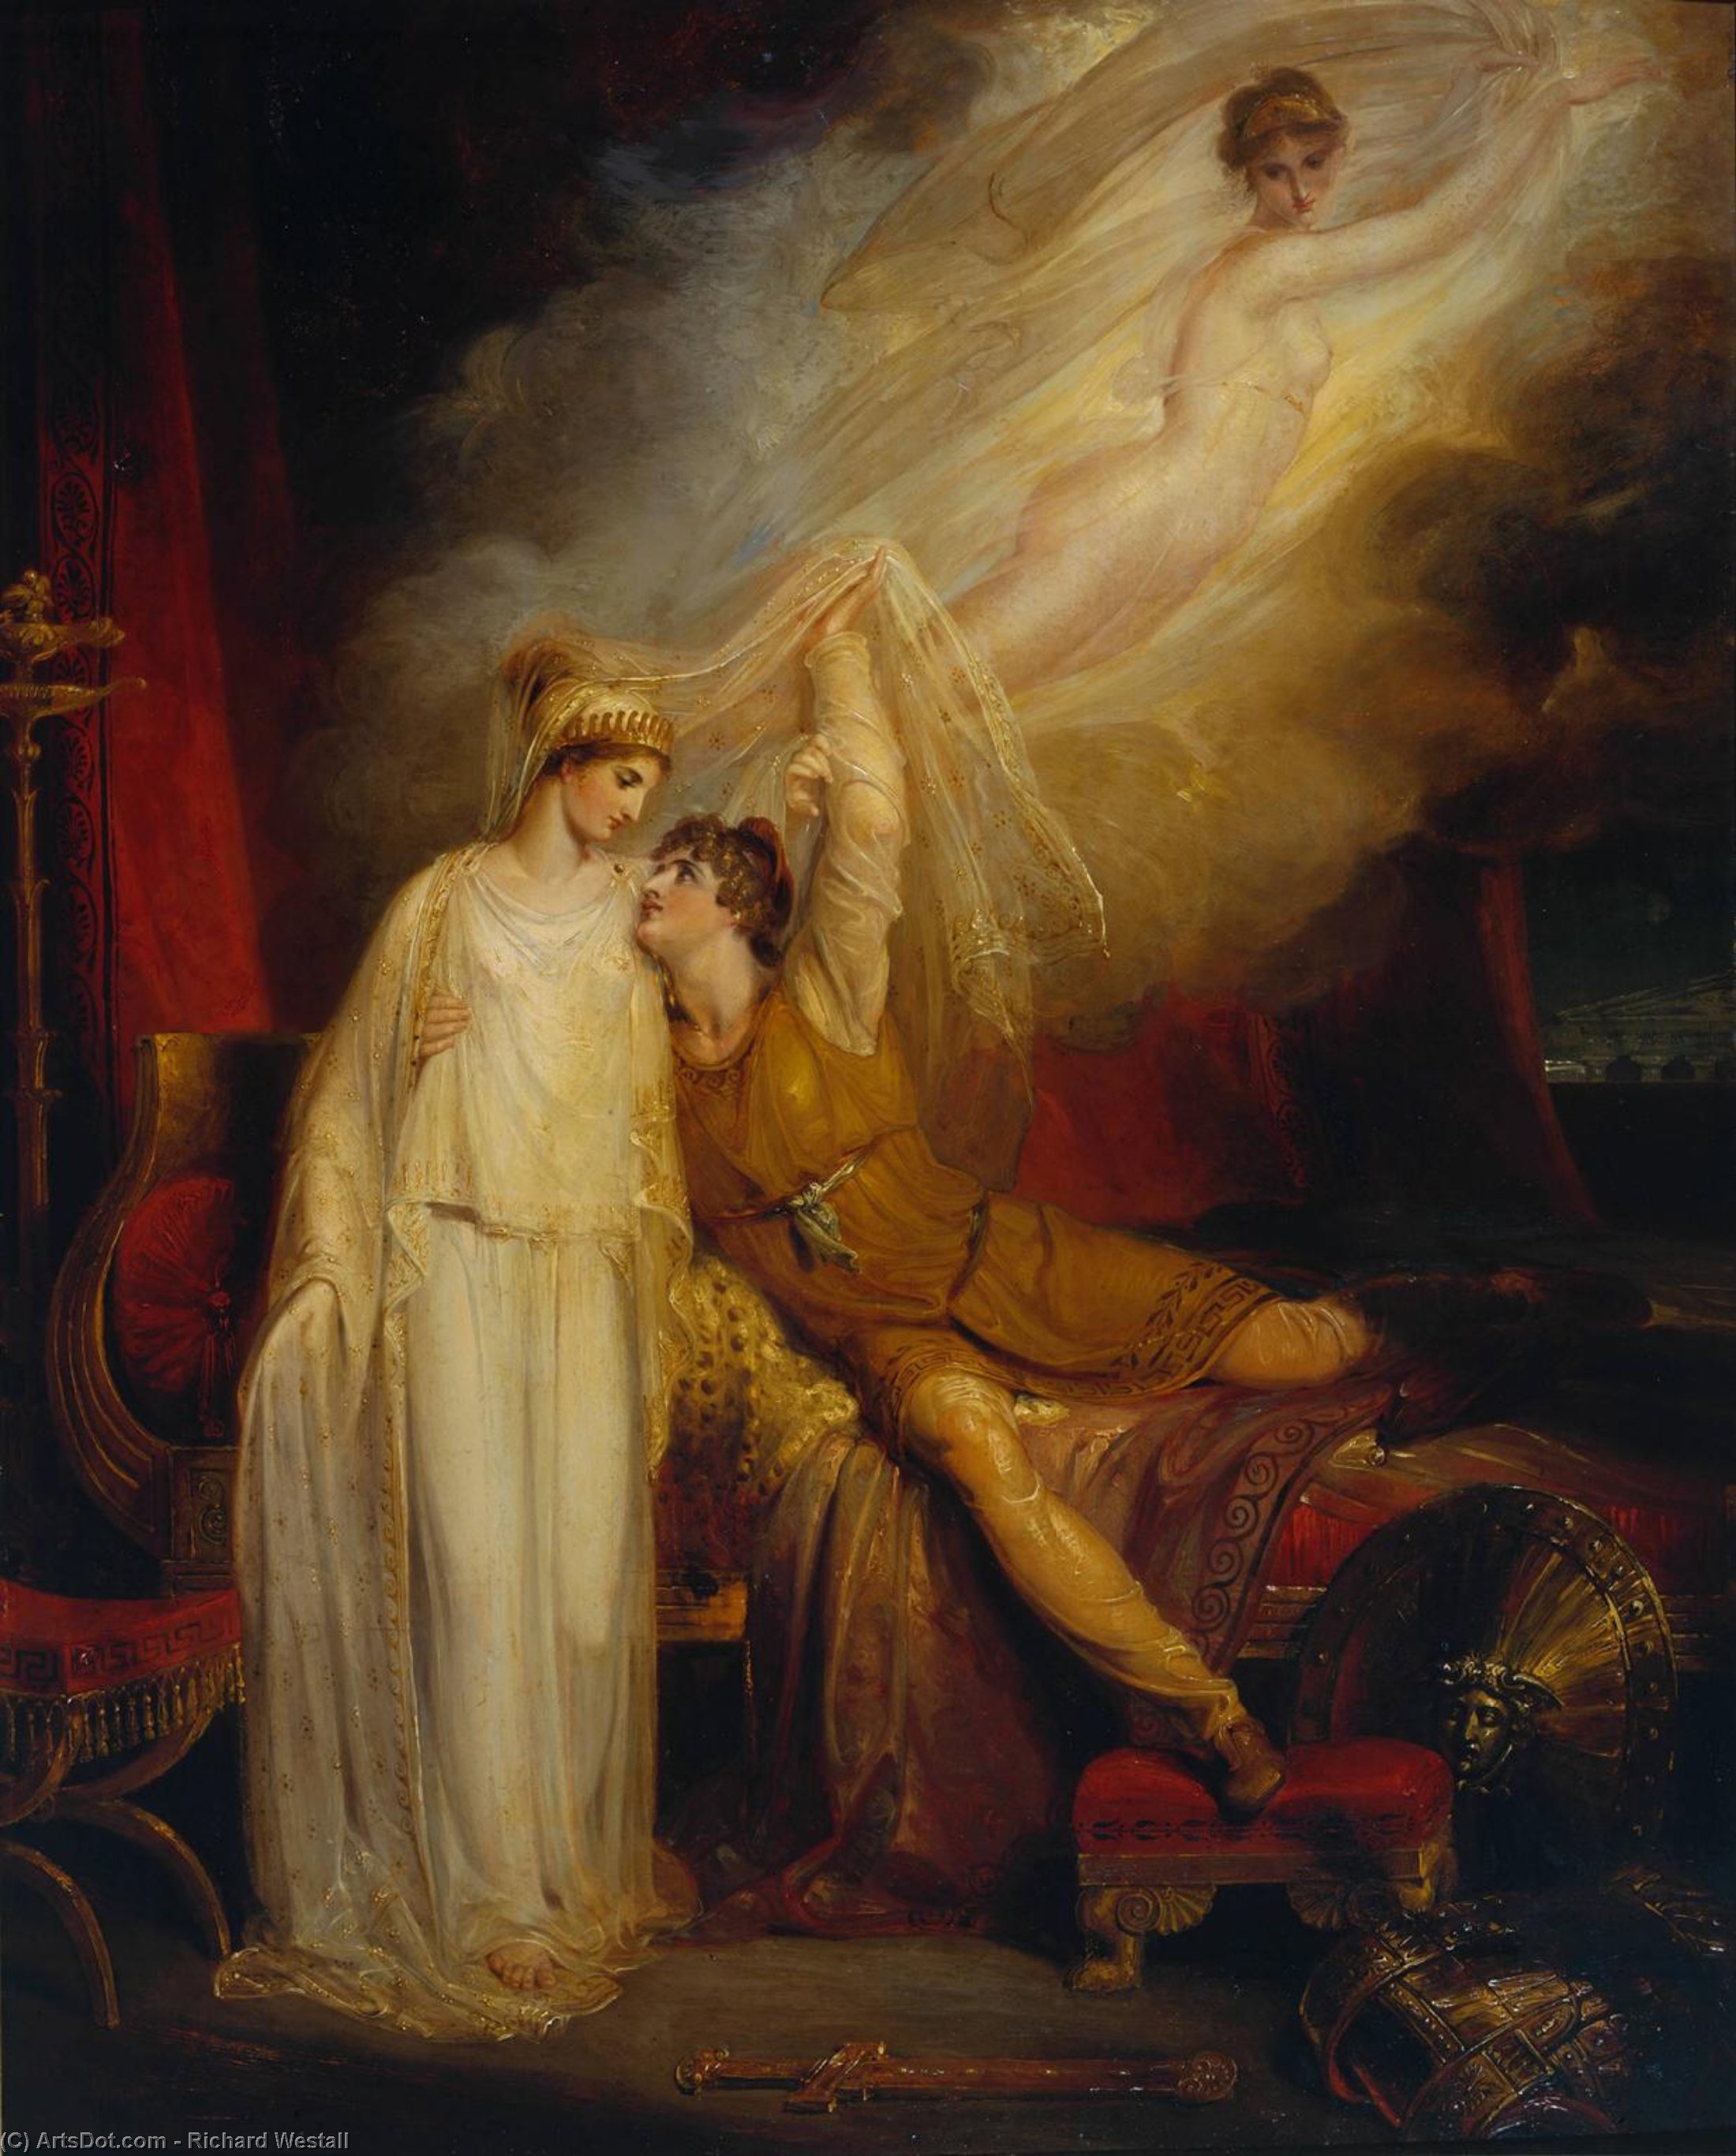 WikiOO.org - Güzel Sanatlar Ansiklopedisi - Resim, Resimler Richard Westall - The Reconciliation Of Helen And Paris After His Defeat By Menelaus